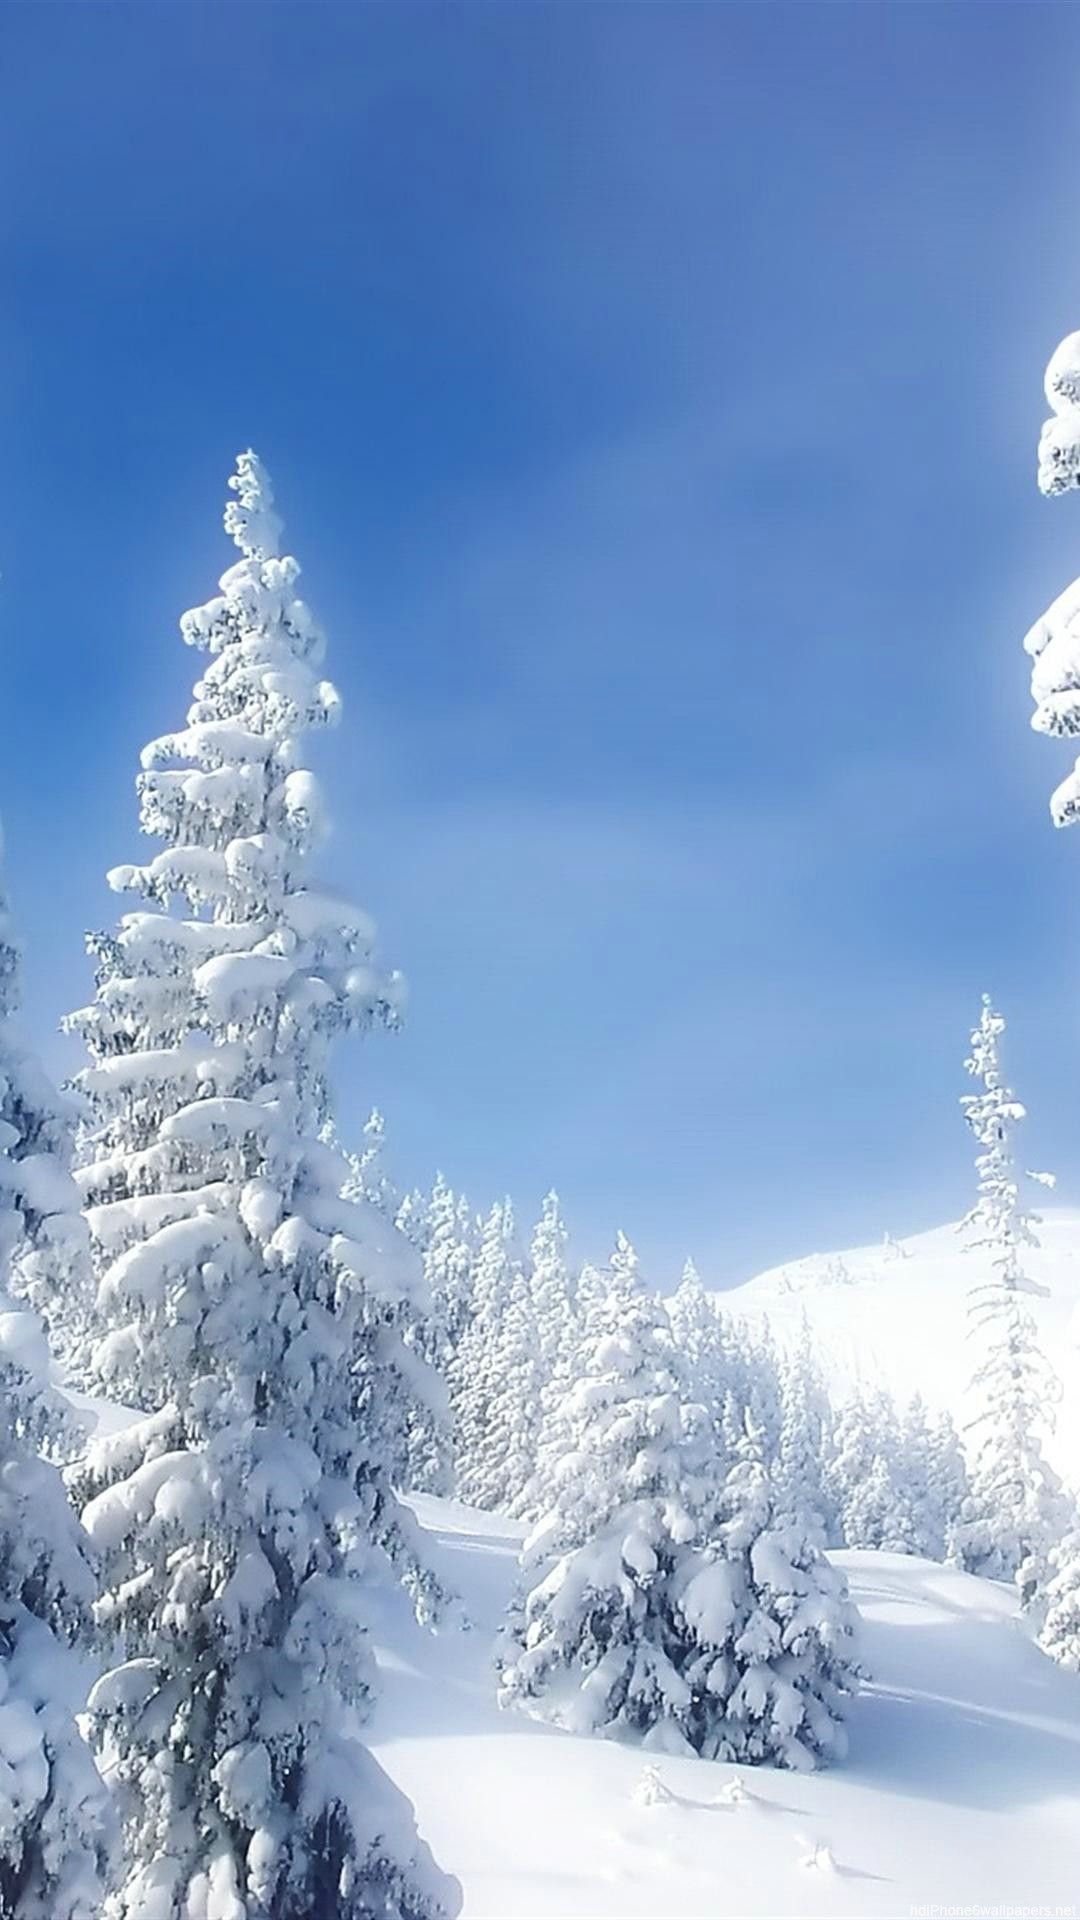 Snow-Covered Trees 4K wallpaper download